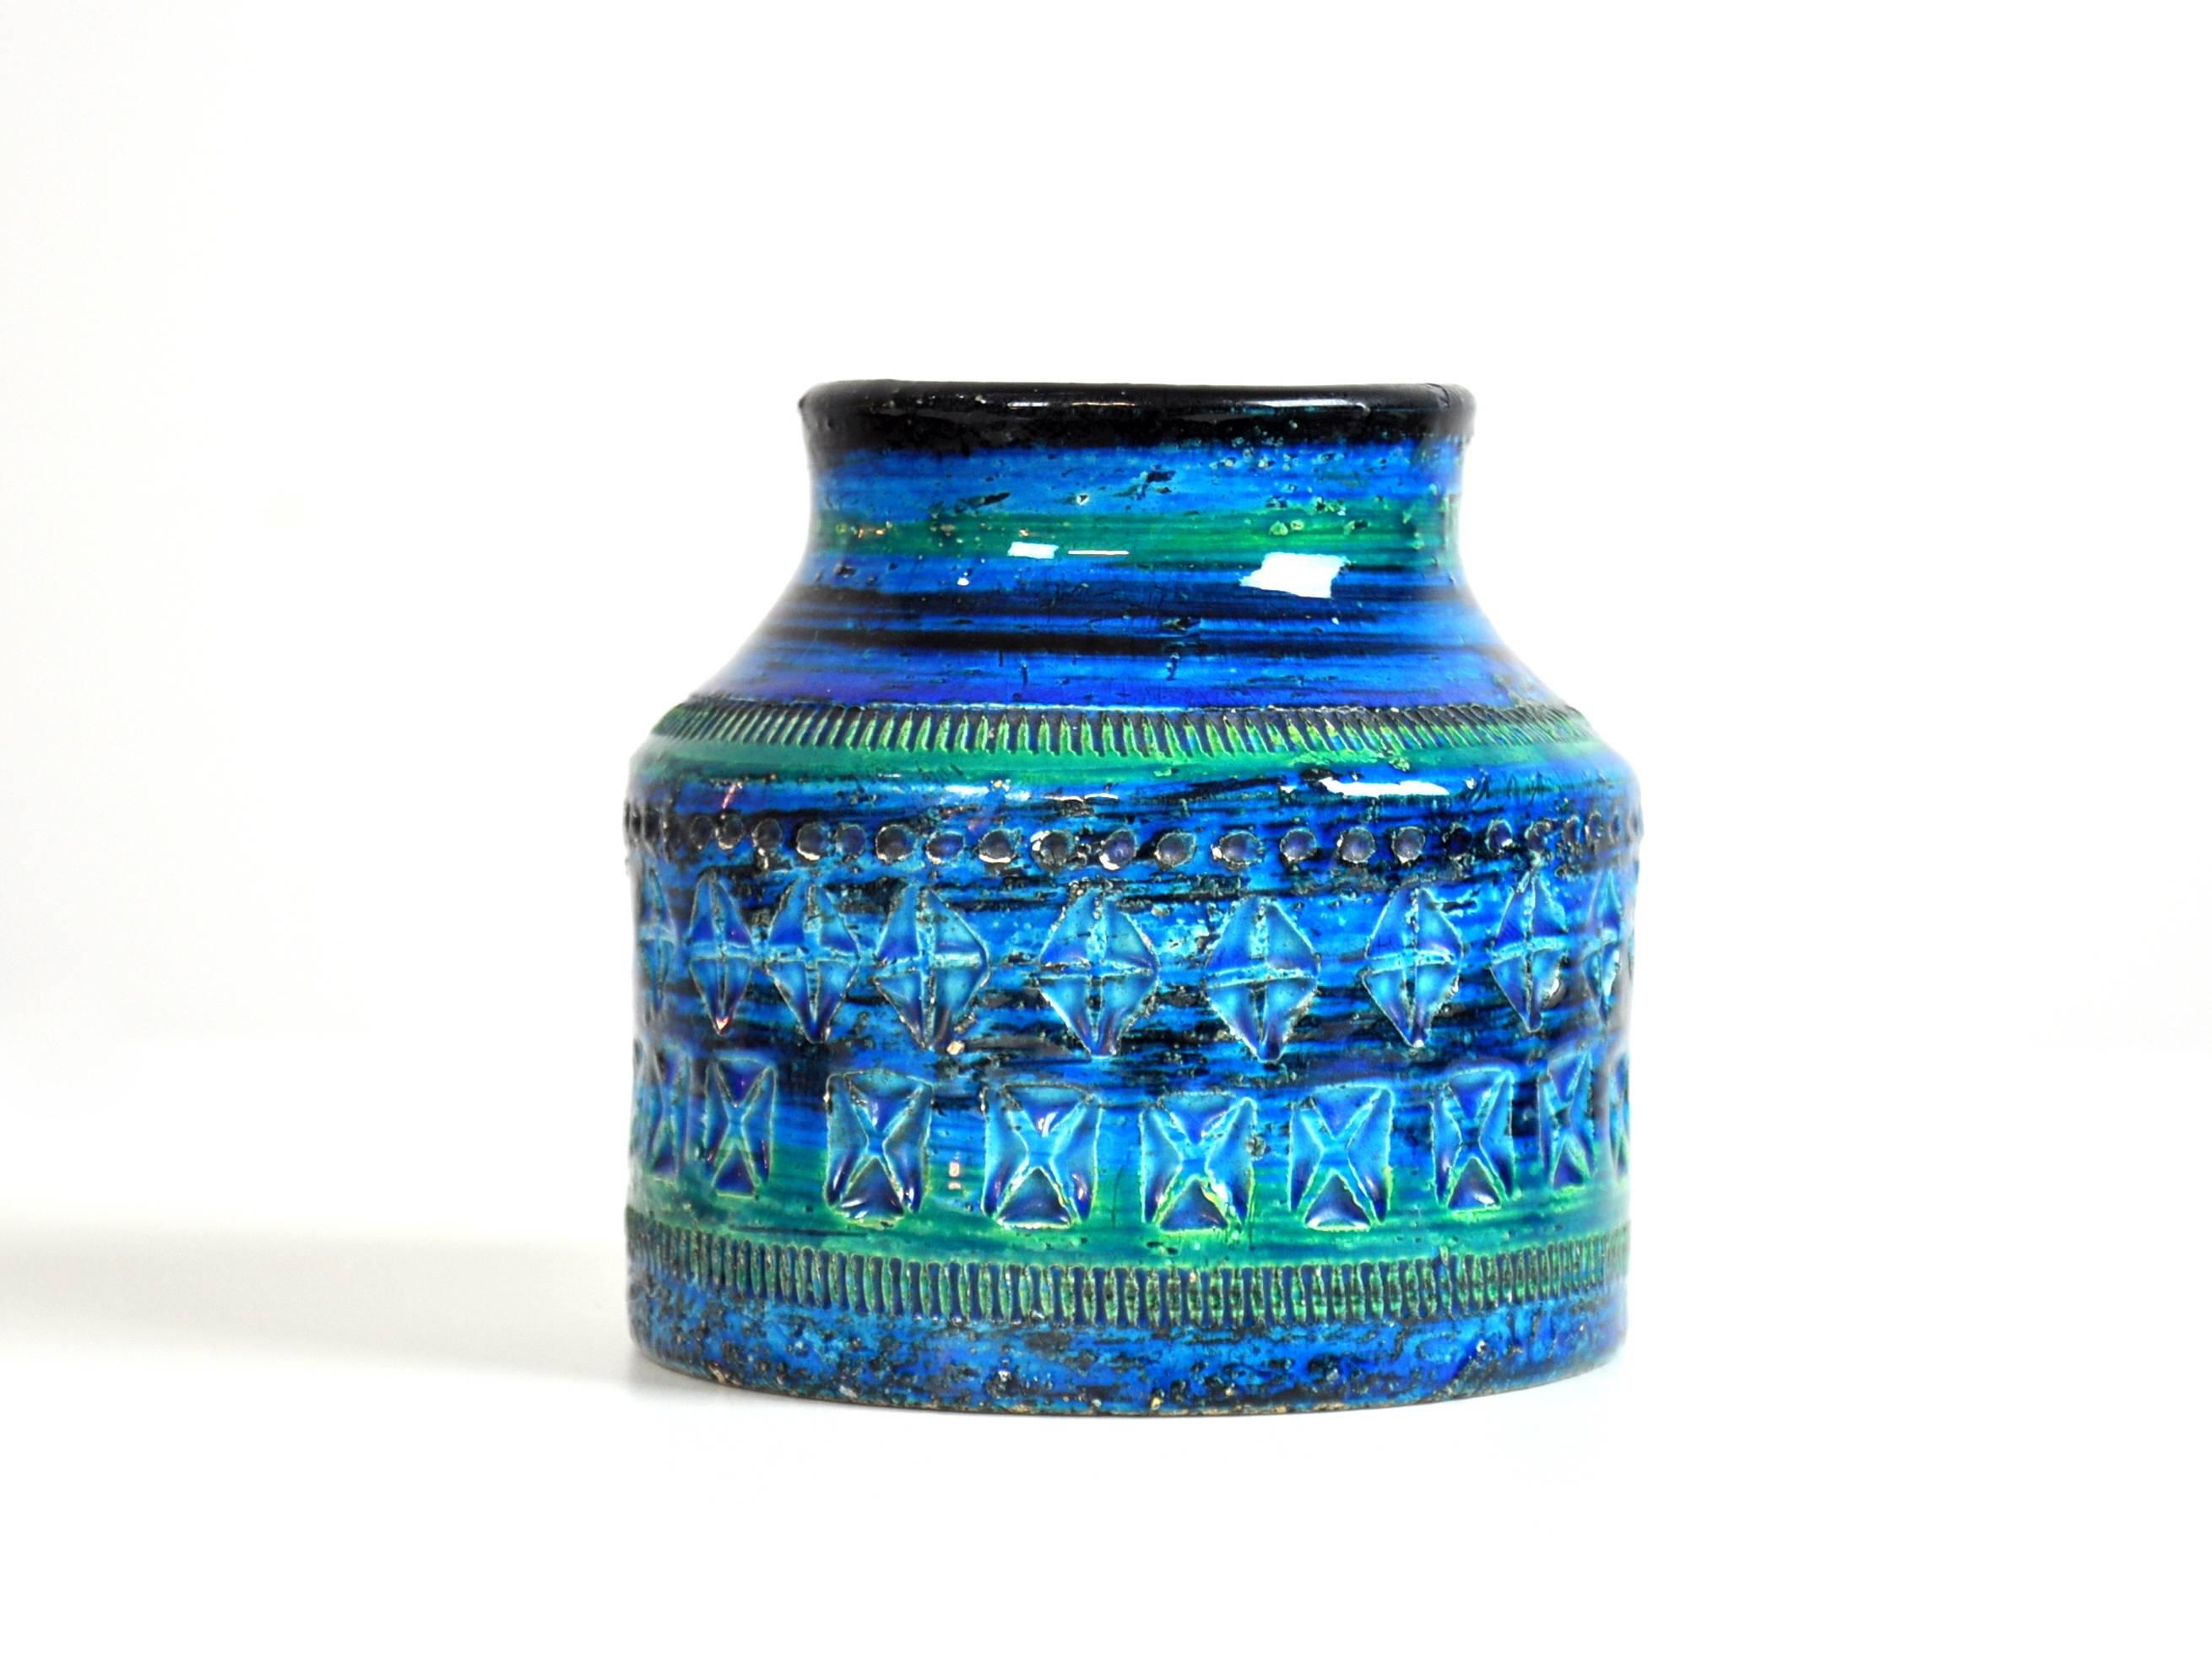 A vintage Italian Mid-Century Modern handmade ceramic vase or small planter in the vibrant signature blue of Aldo Londi's iconic art pottery collection Rimini Blu, designed in 1959 for Bitossi Ceramiche and imported by Raymor in the 1960s. The deep